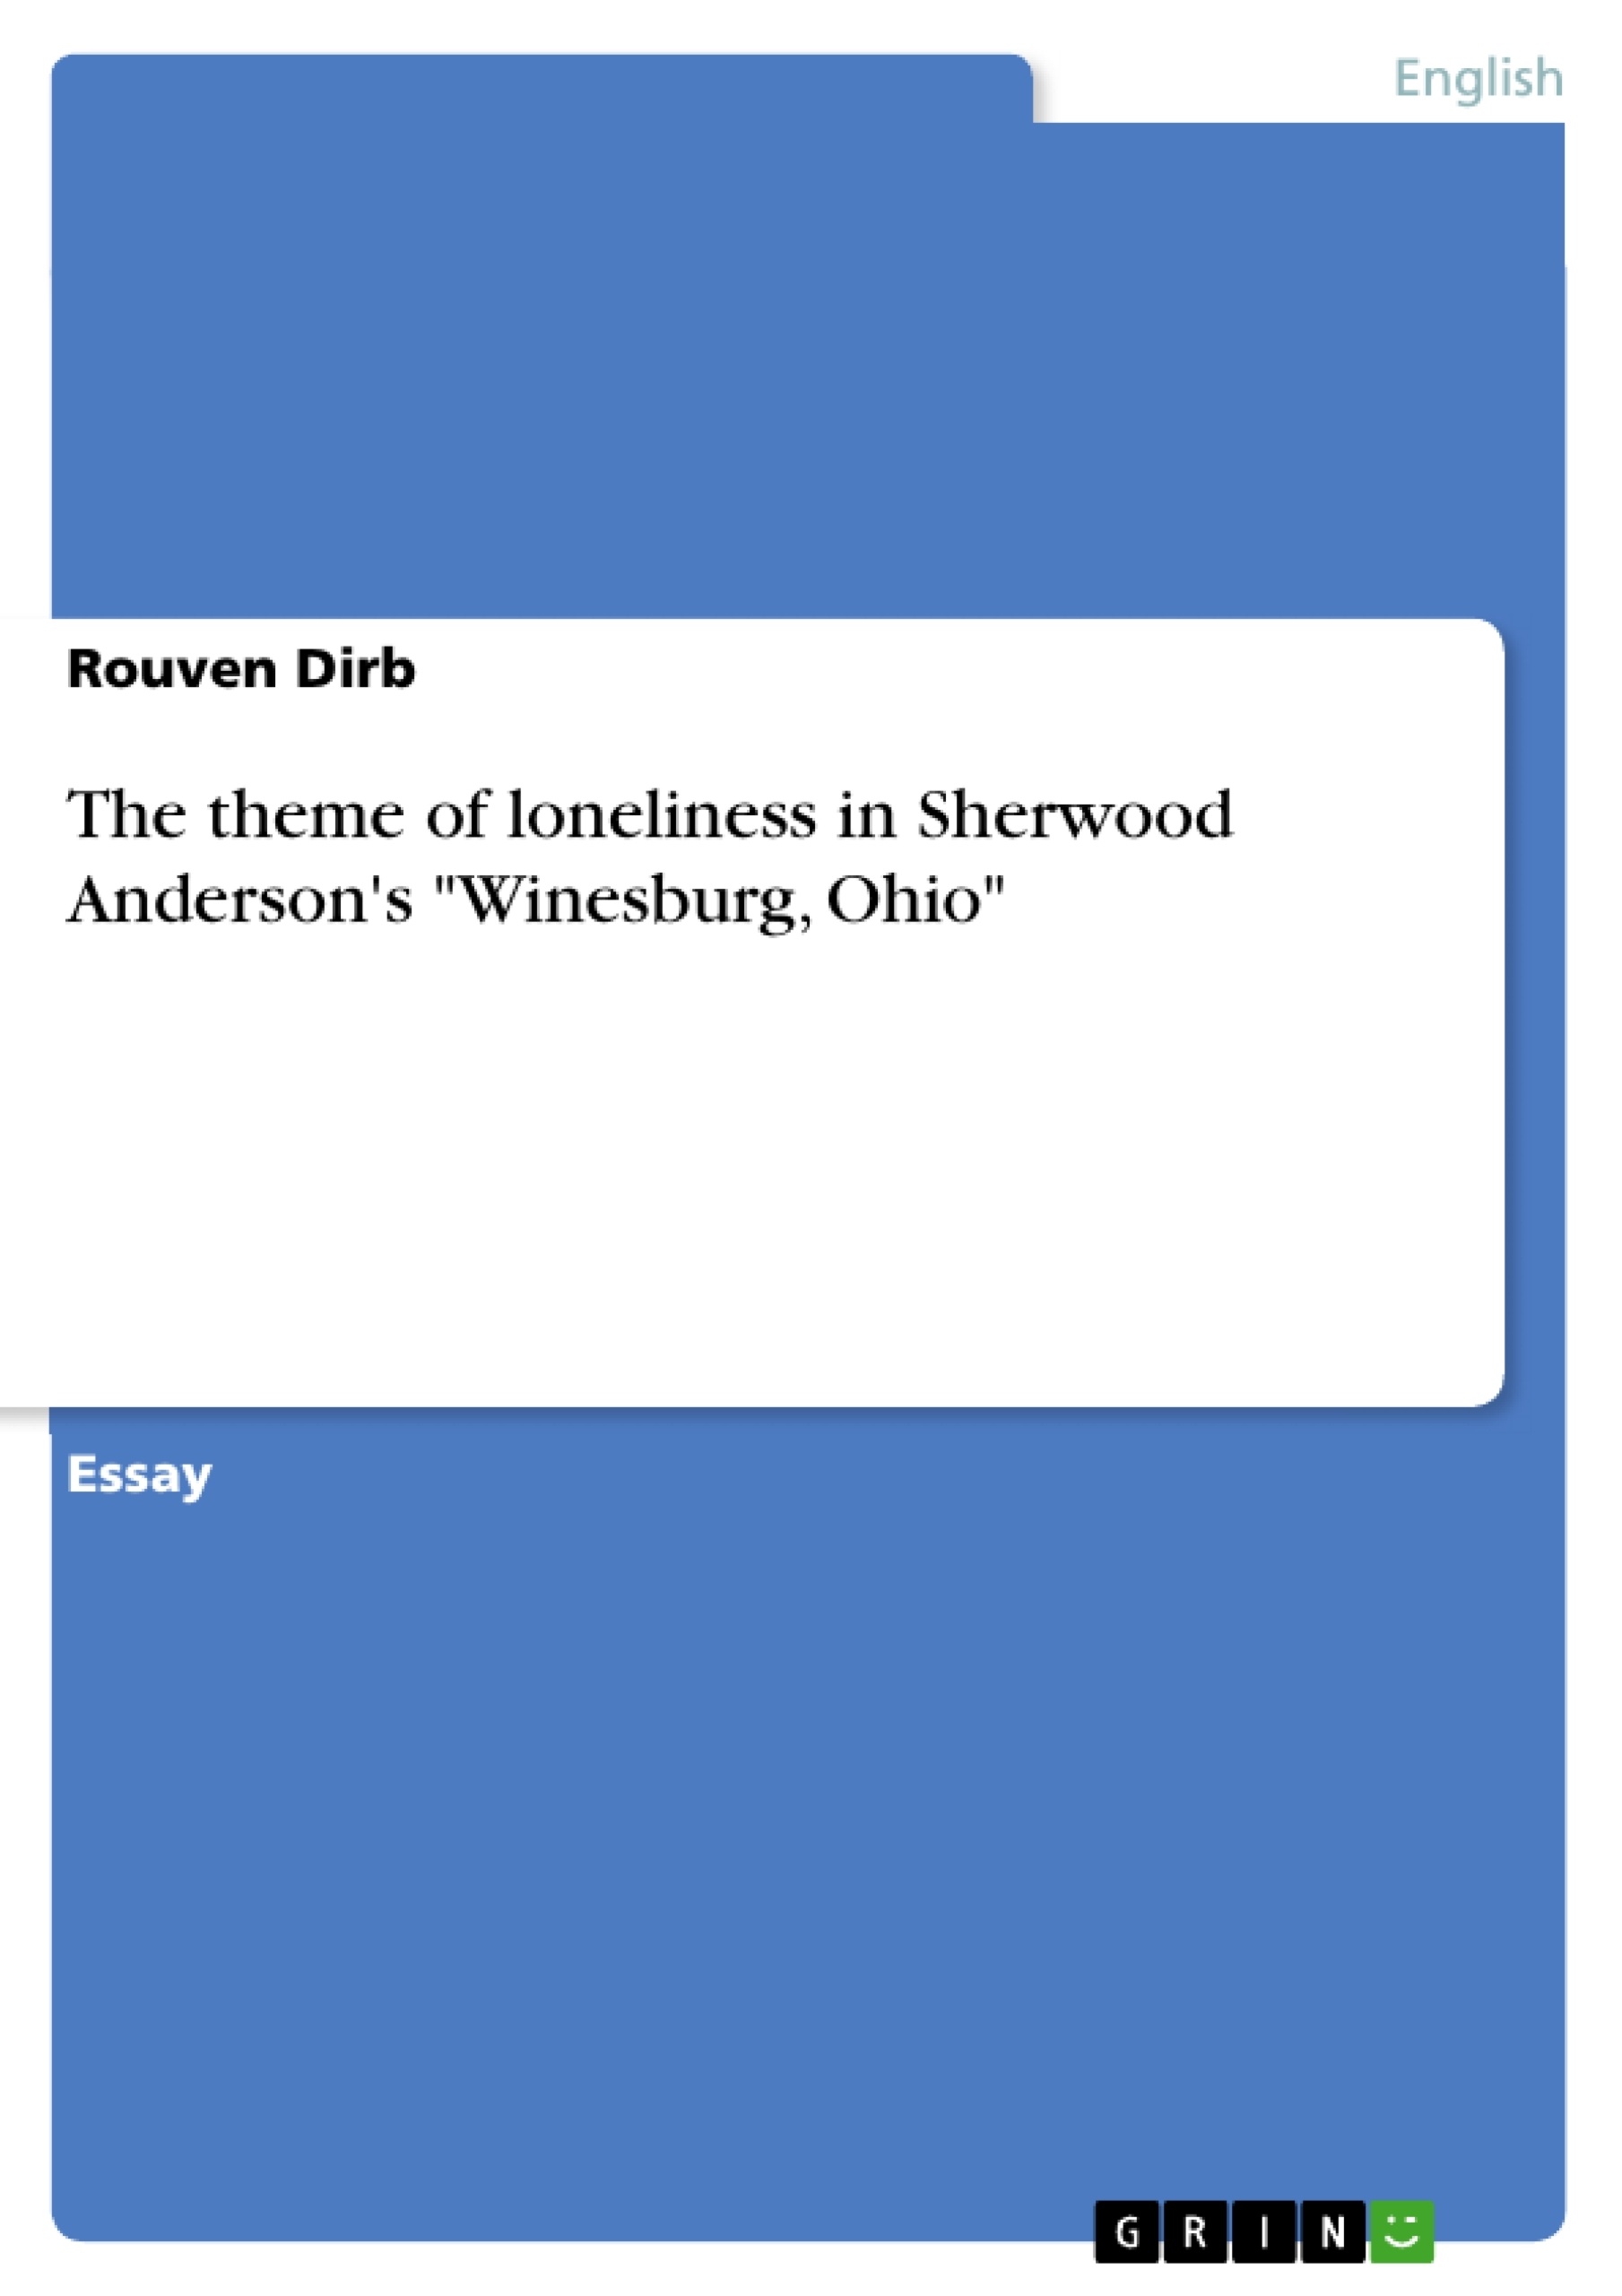 Title: The theme of loneliness in Sherwood Anderson's "Winesburg, Ohio"